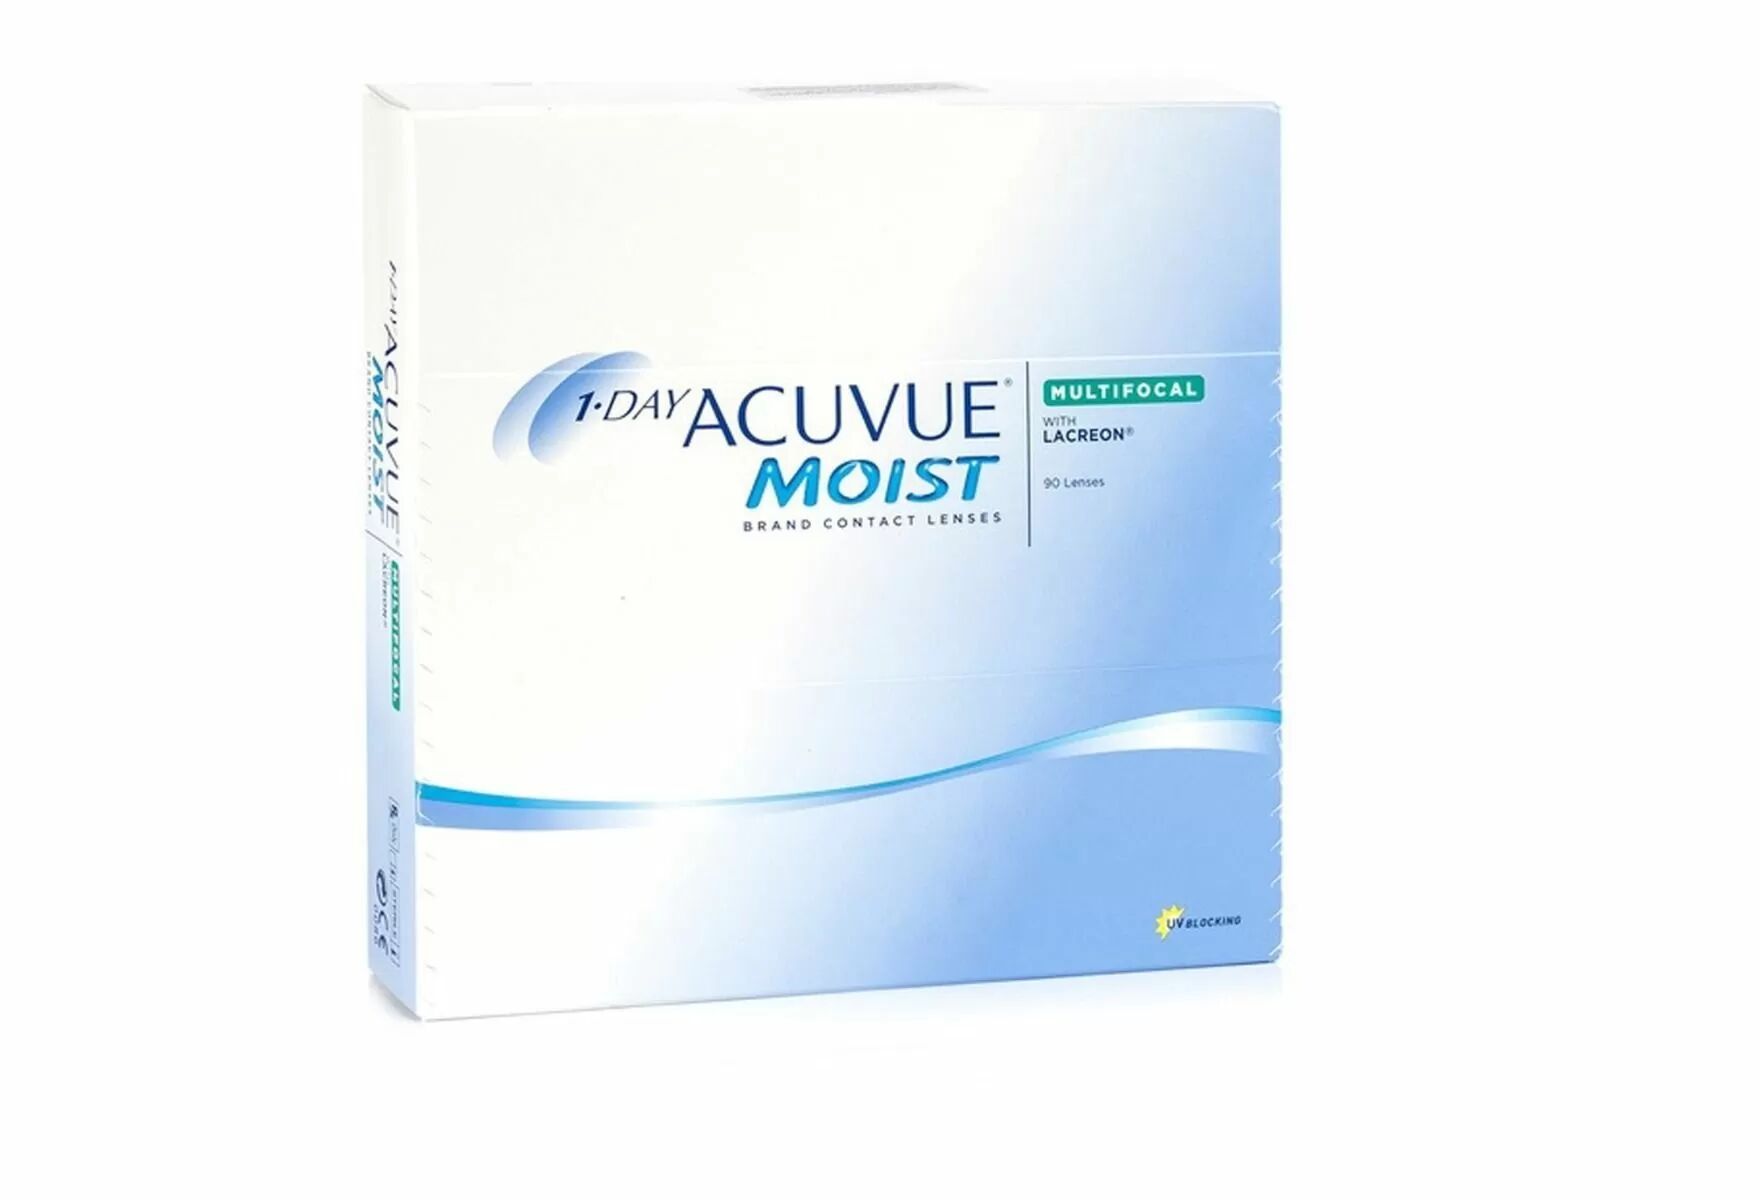 Acuvue 1-Day Acuvue Moist Multifocal 90 Stk